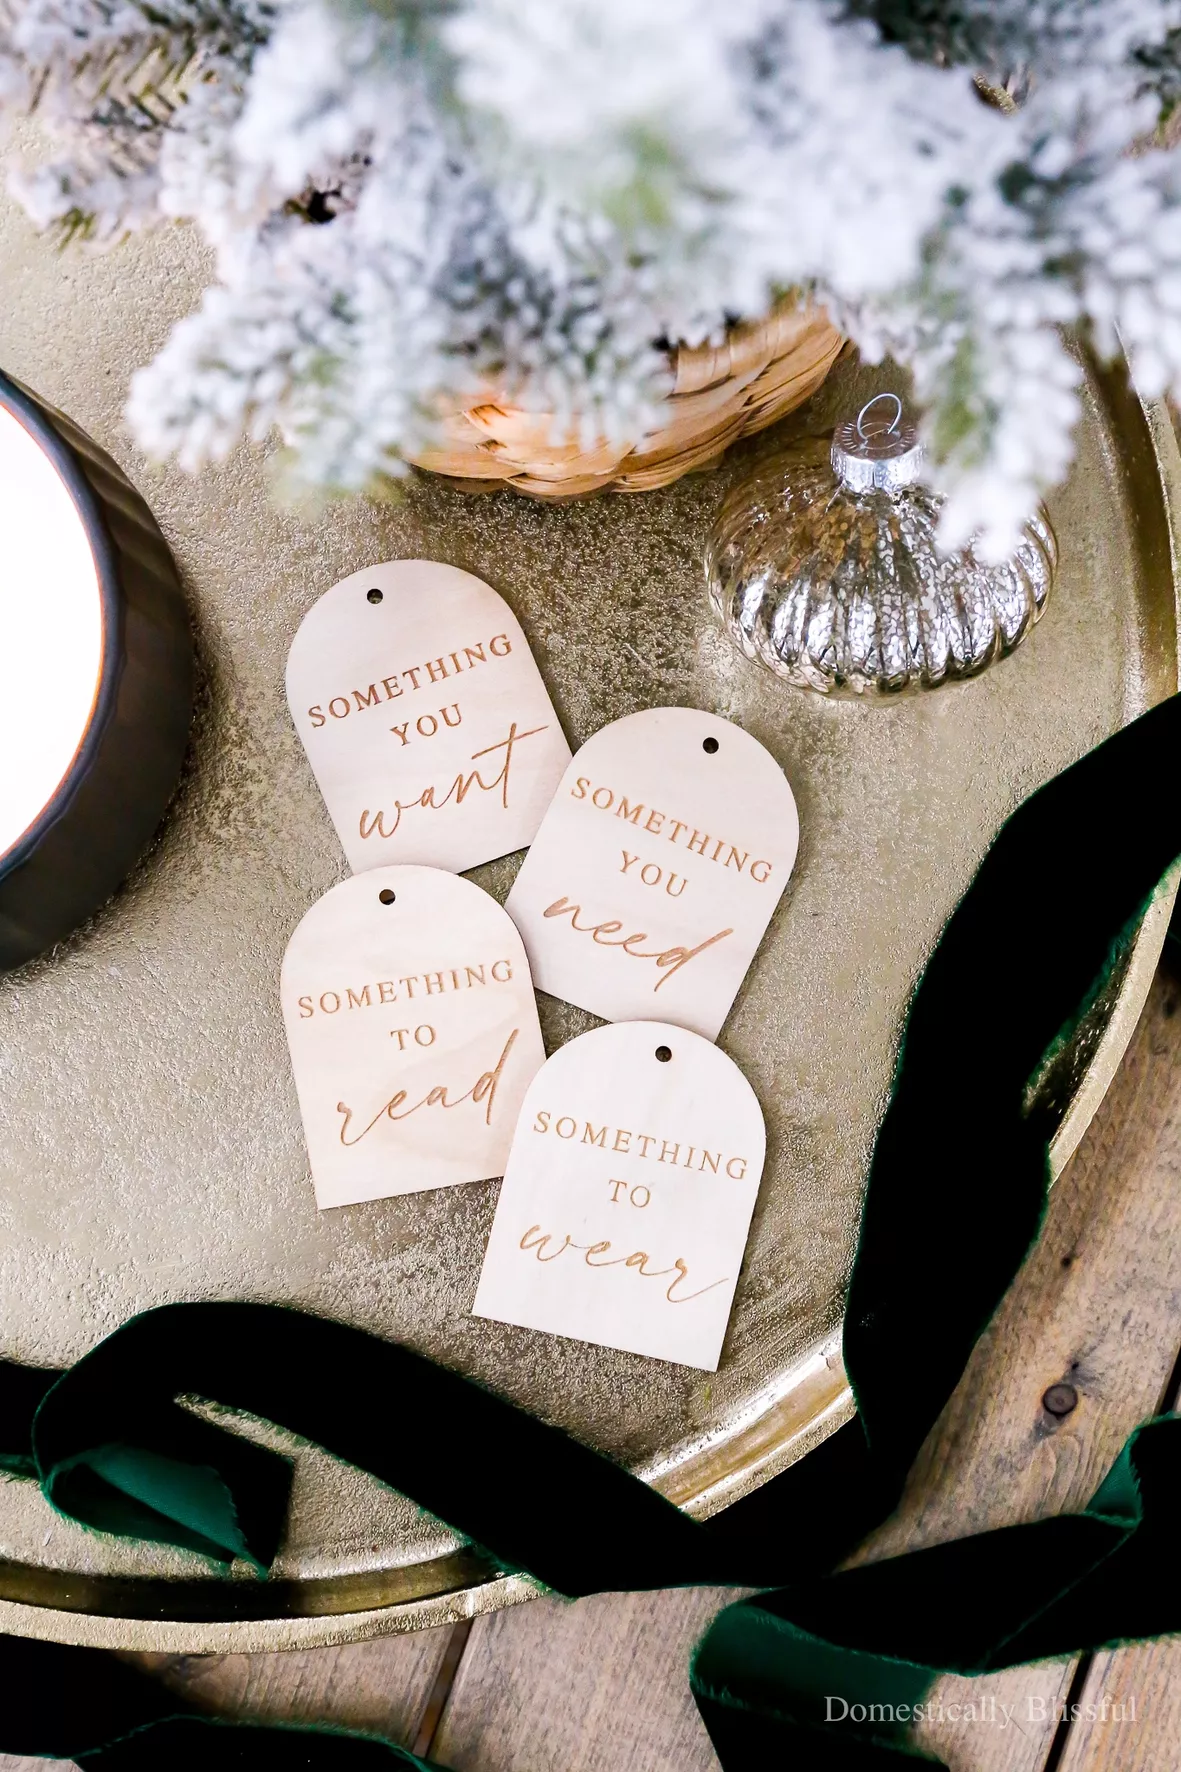 Something You Wooden Christmas Tags Gift Tags for Presents Something You  Wear Something You Play Something You Want Need 